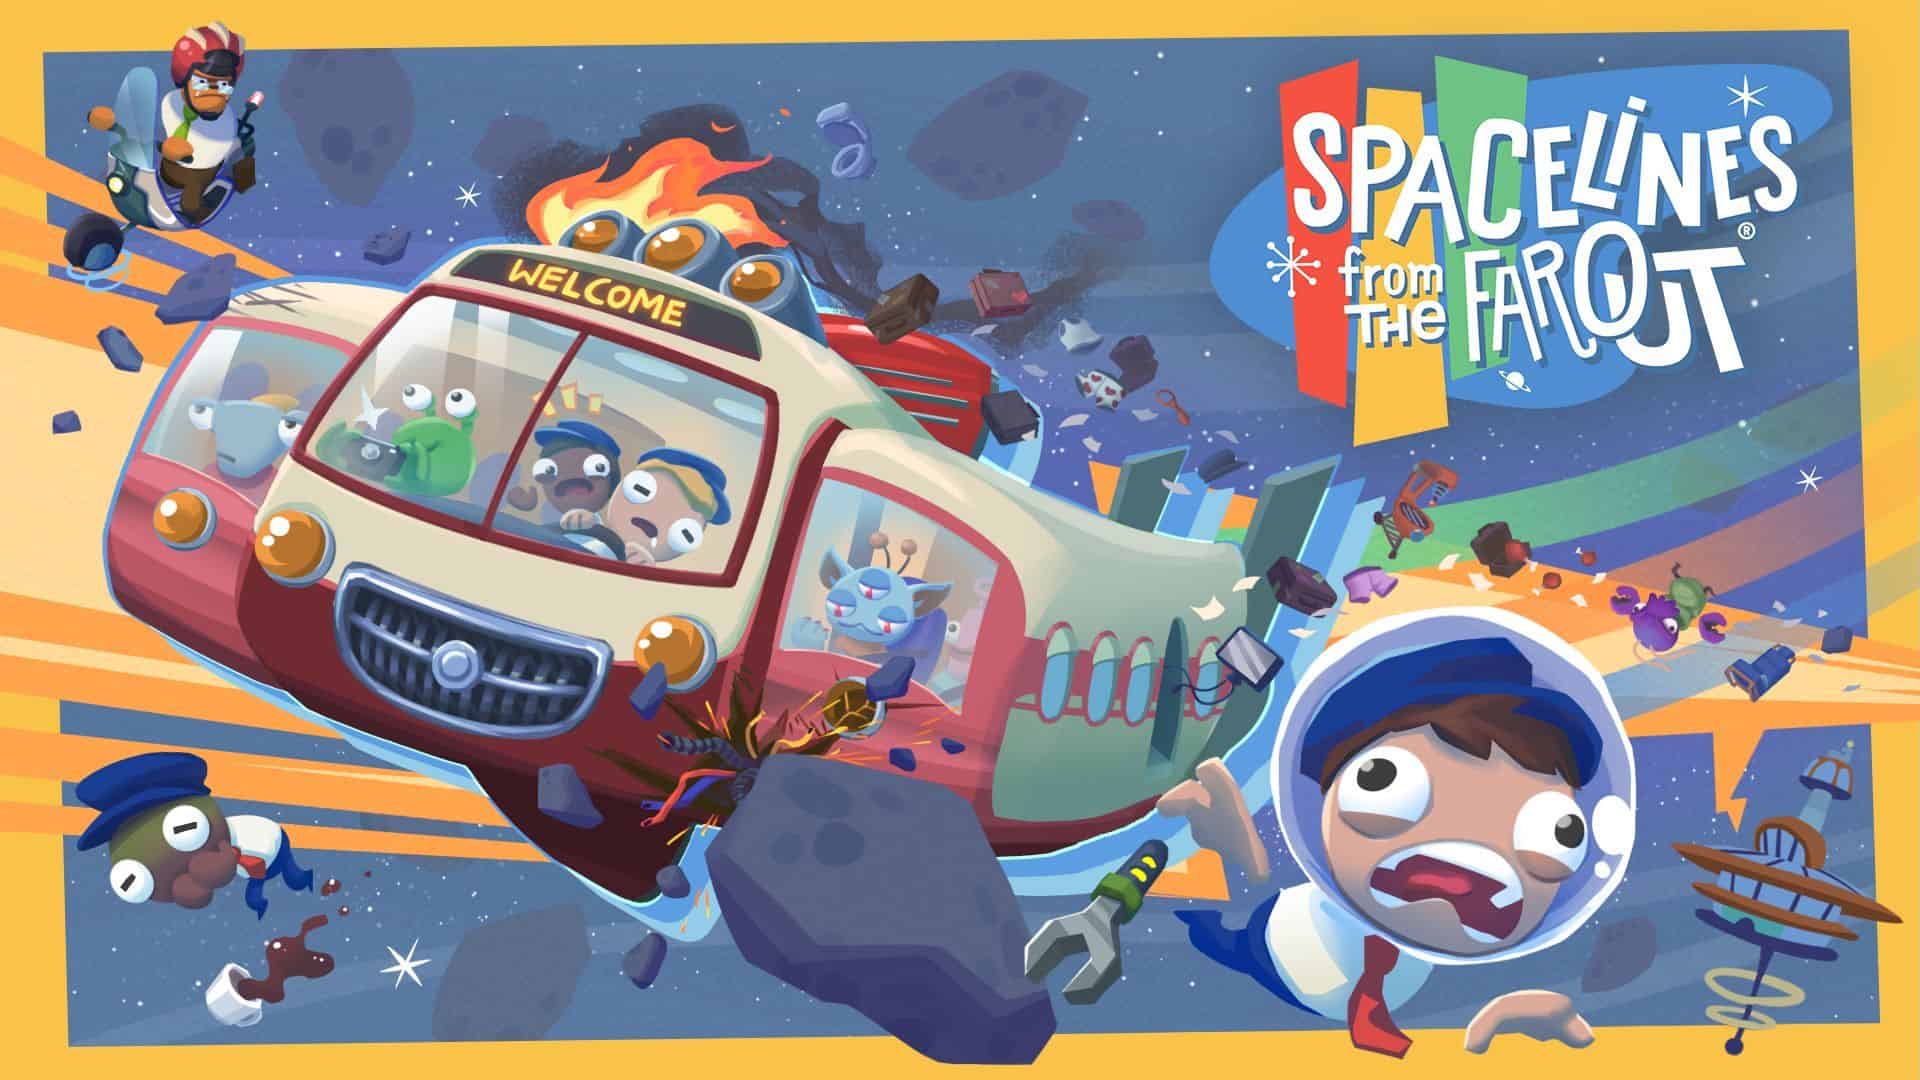 Spacelines from the Far Out game poster showing a bus with human and alien passengers in the outer space